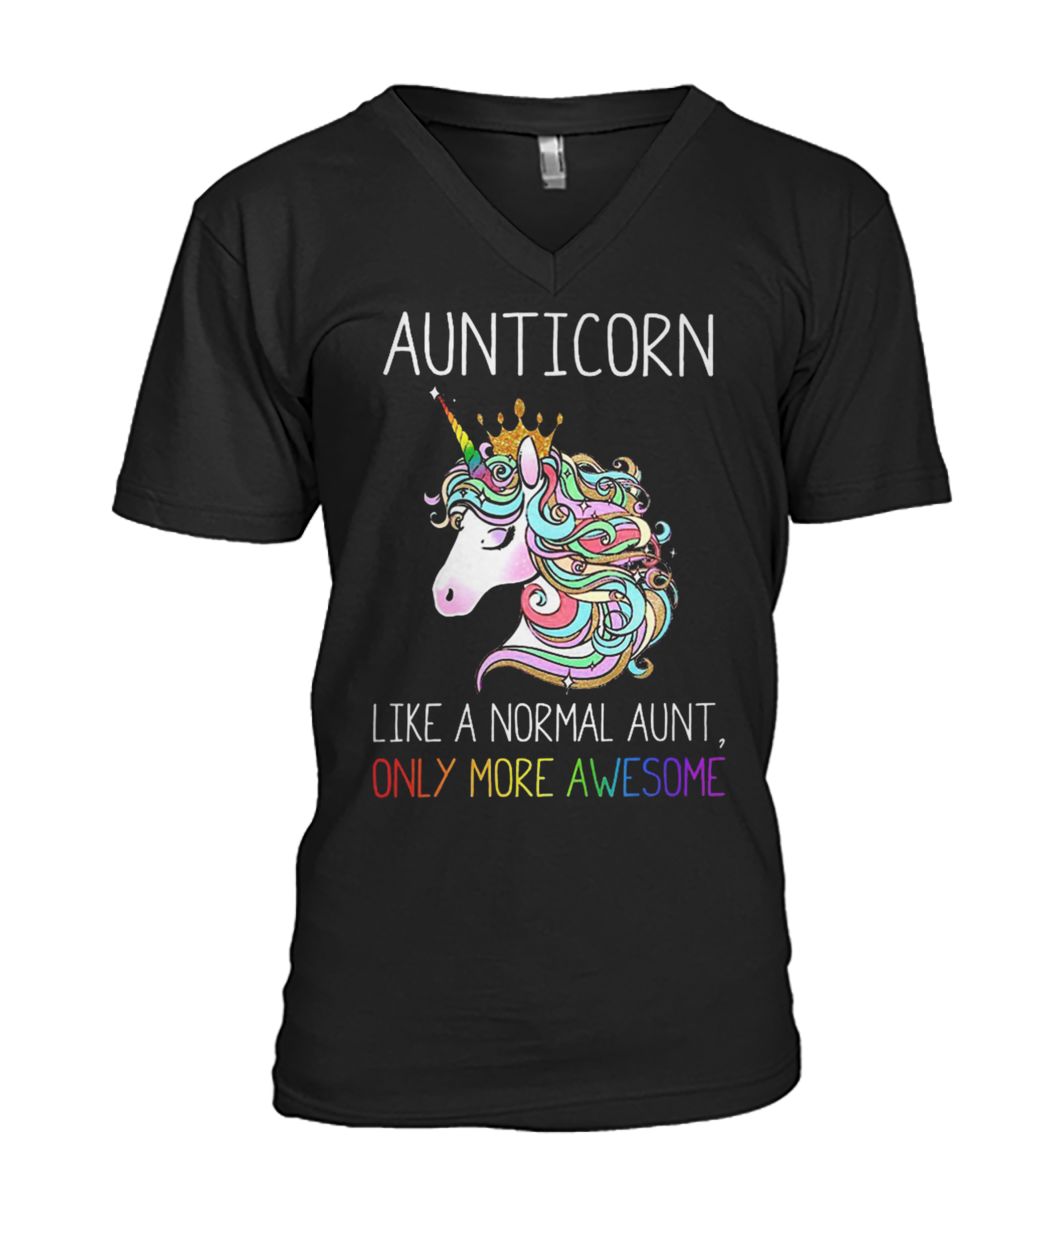 Aunticorn like a normal aunt only more awesome mens v-neck